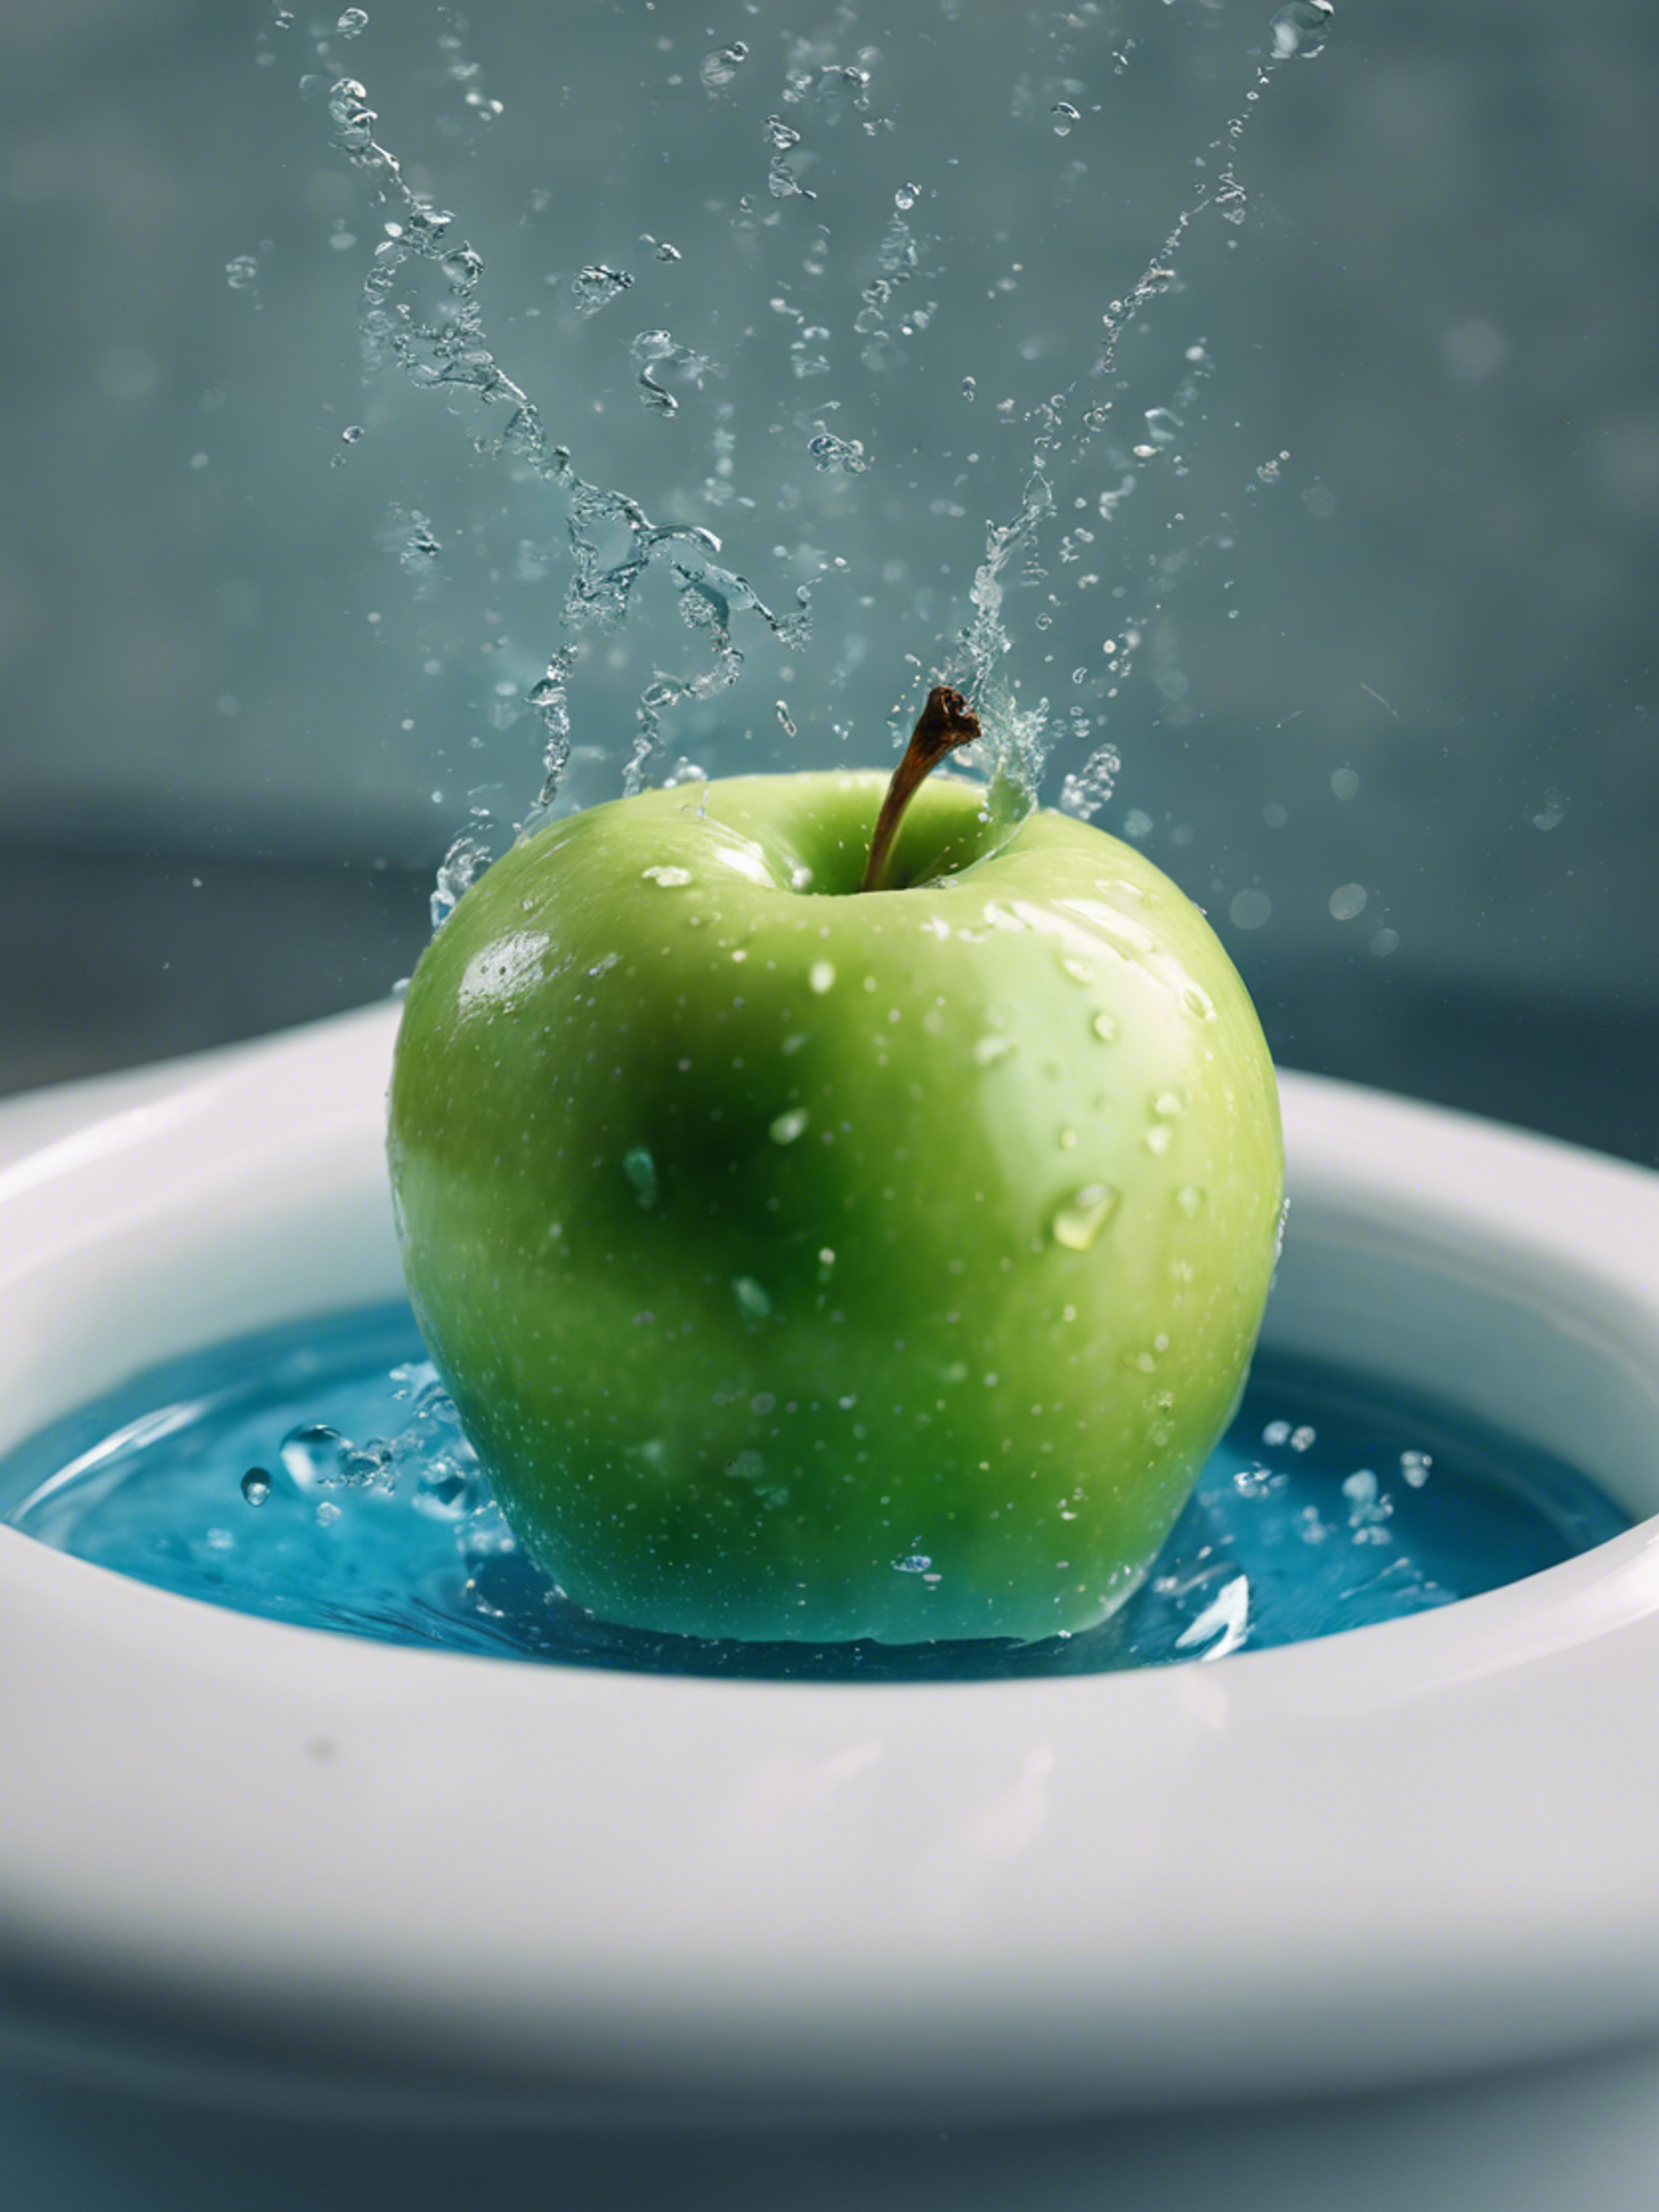 A green apple falling into a basin filled with azure blue water. کاغذ دیواری[a9bb5407cd4a4f929343]